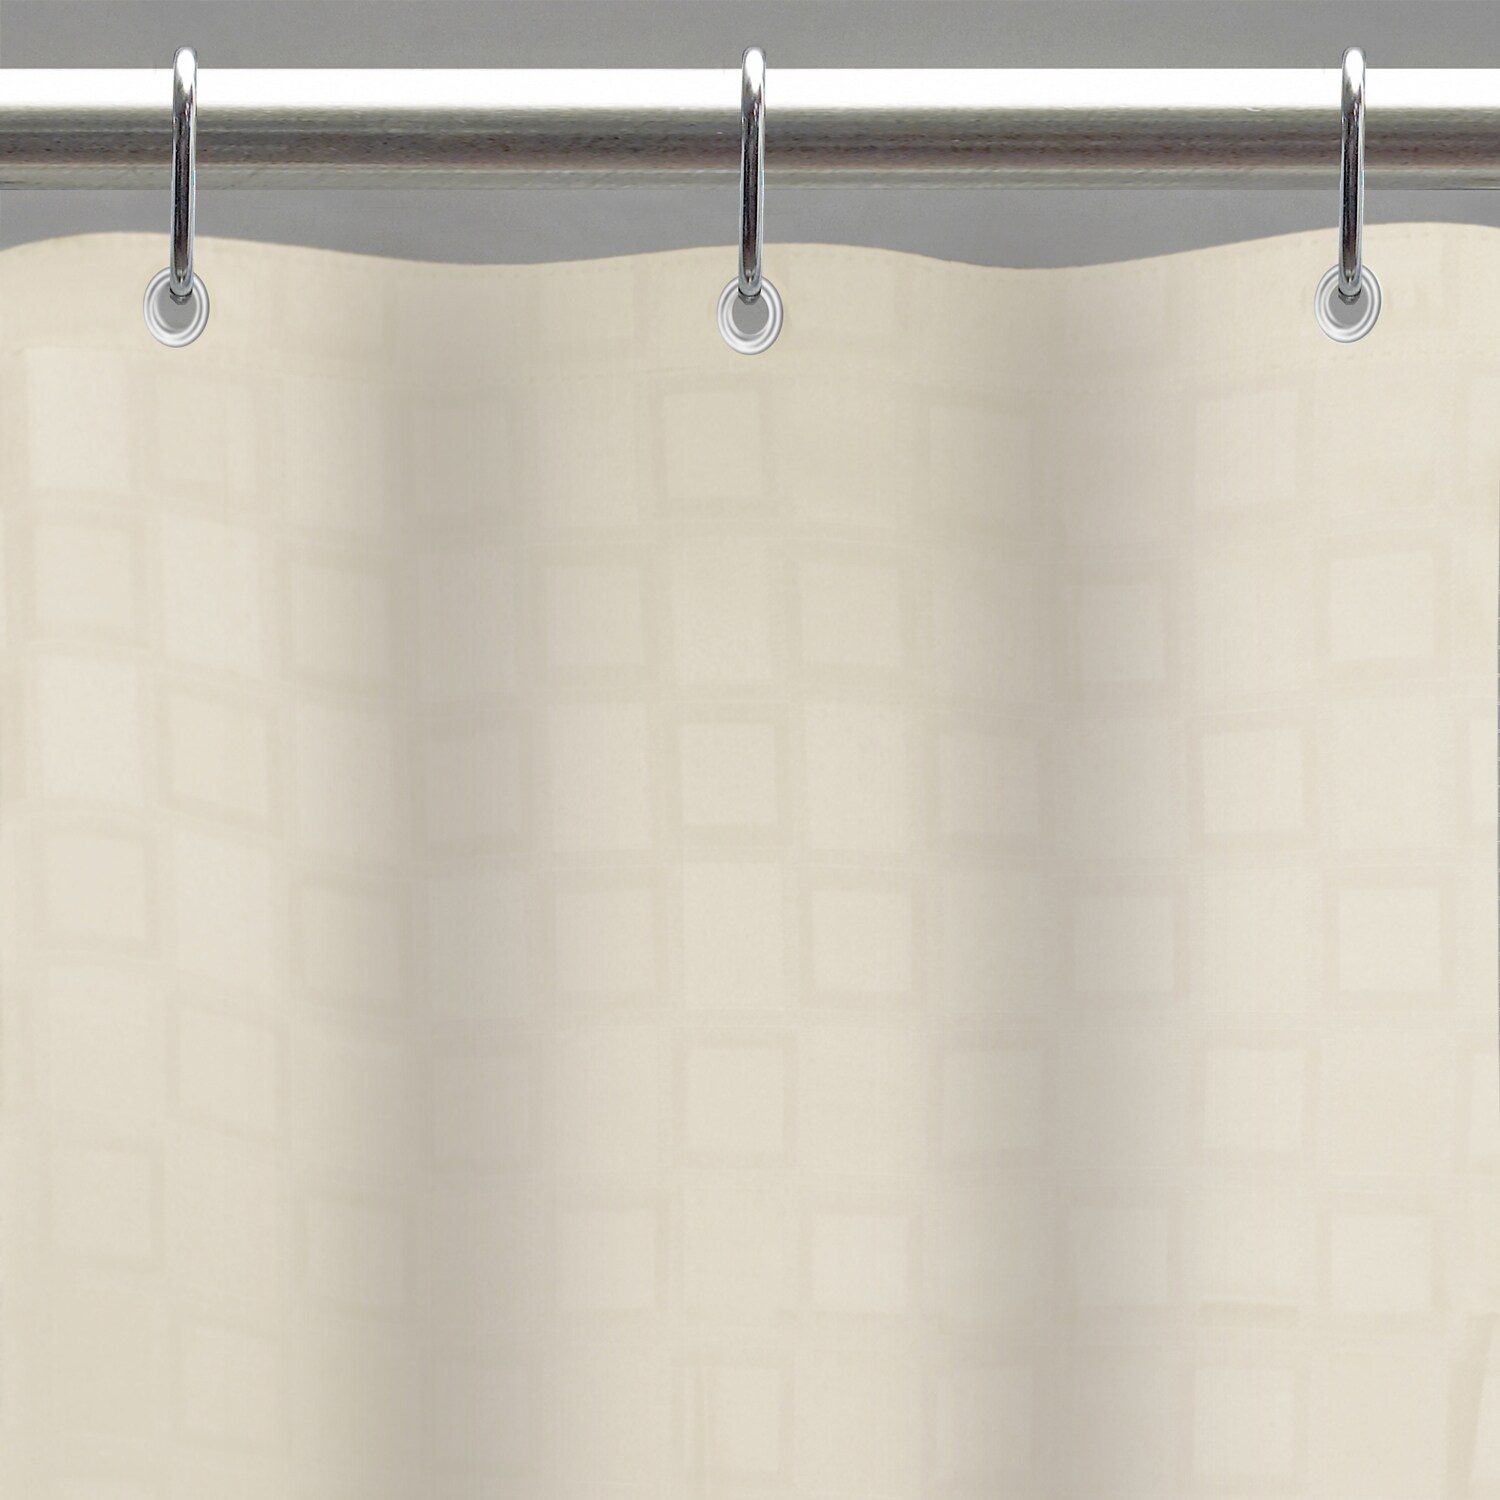 fabric shower curtain with window